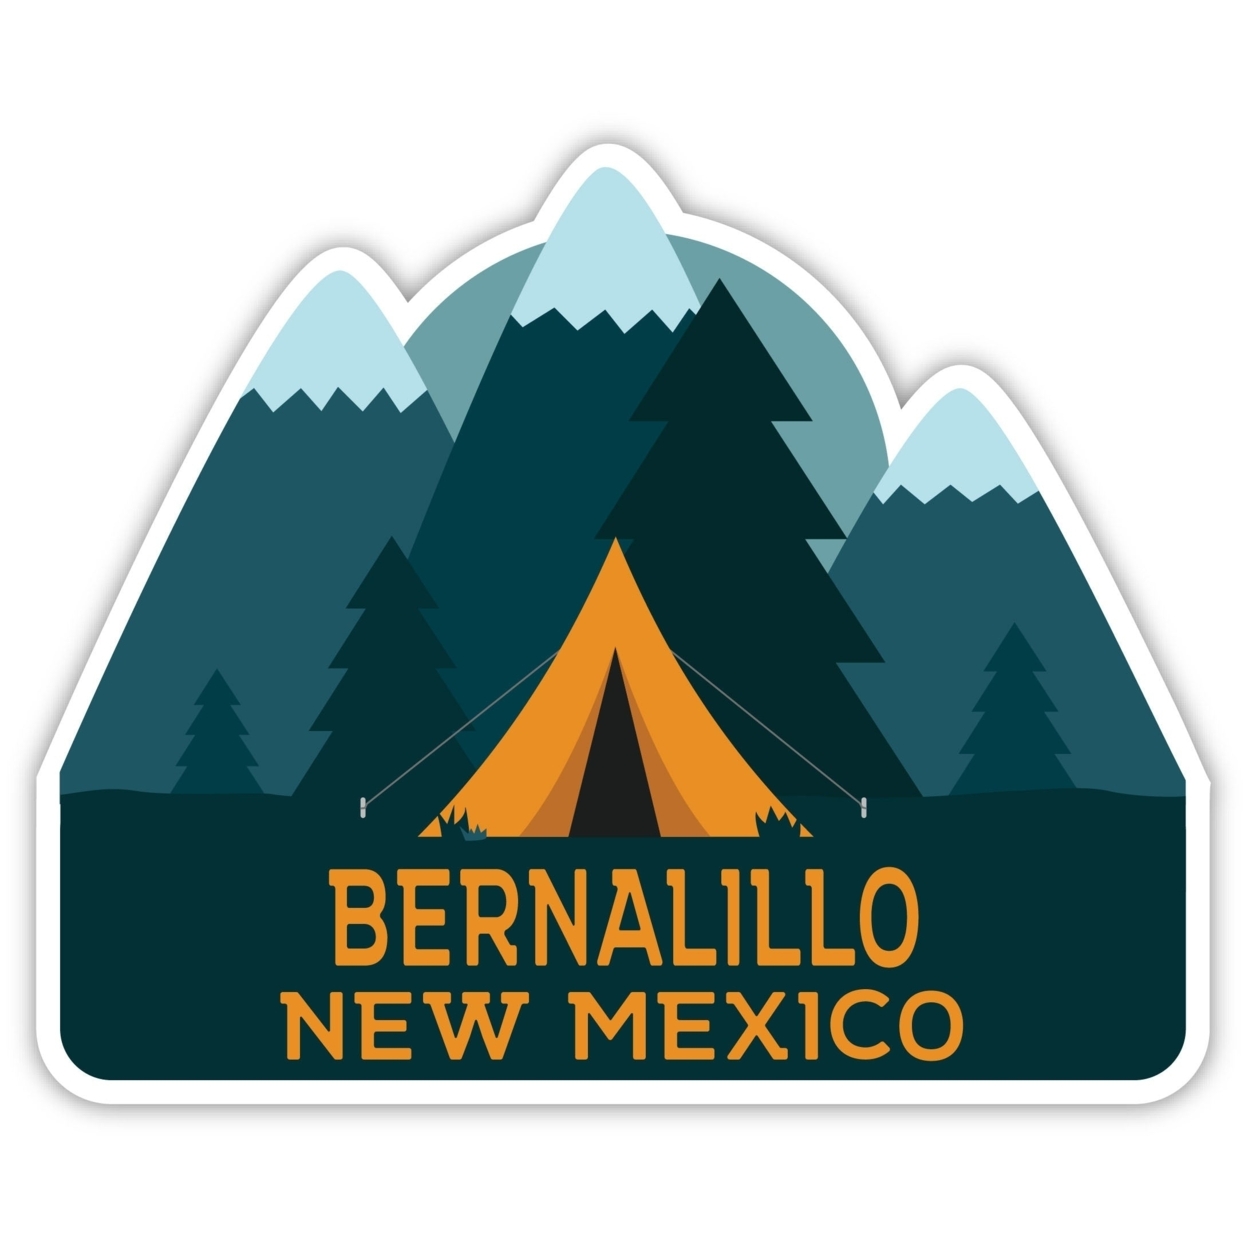 Bernalillo New Mexico Souvenir Decorative Stickers (Choose Theme And Size) - 4-Pack, 10-Inch, Tent